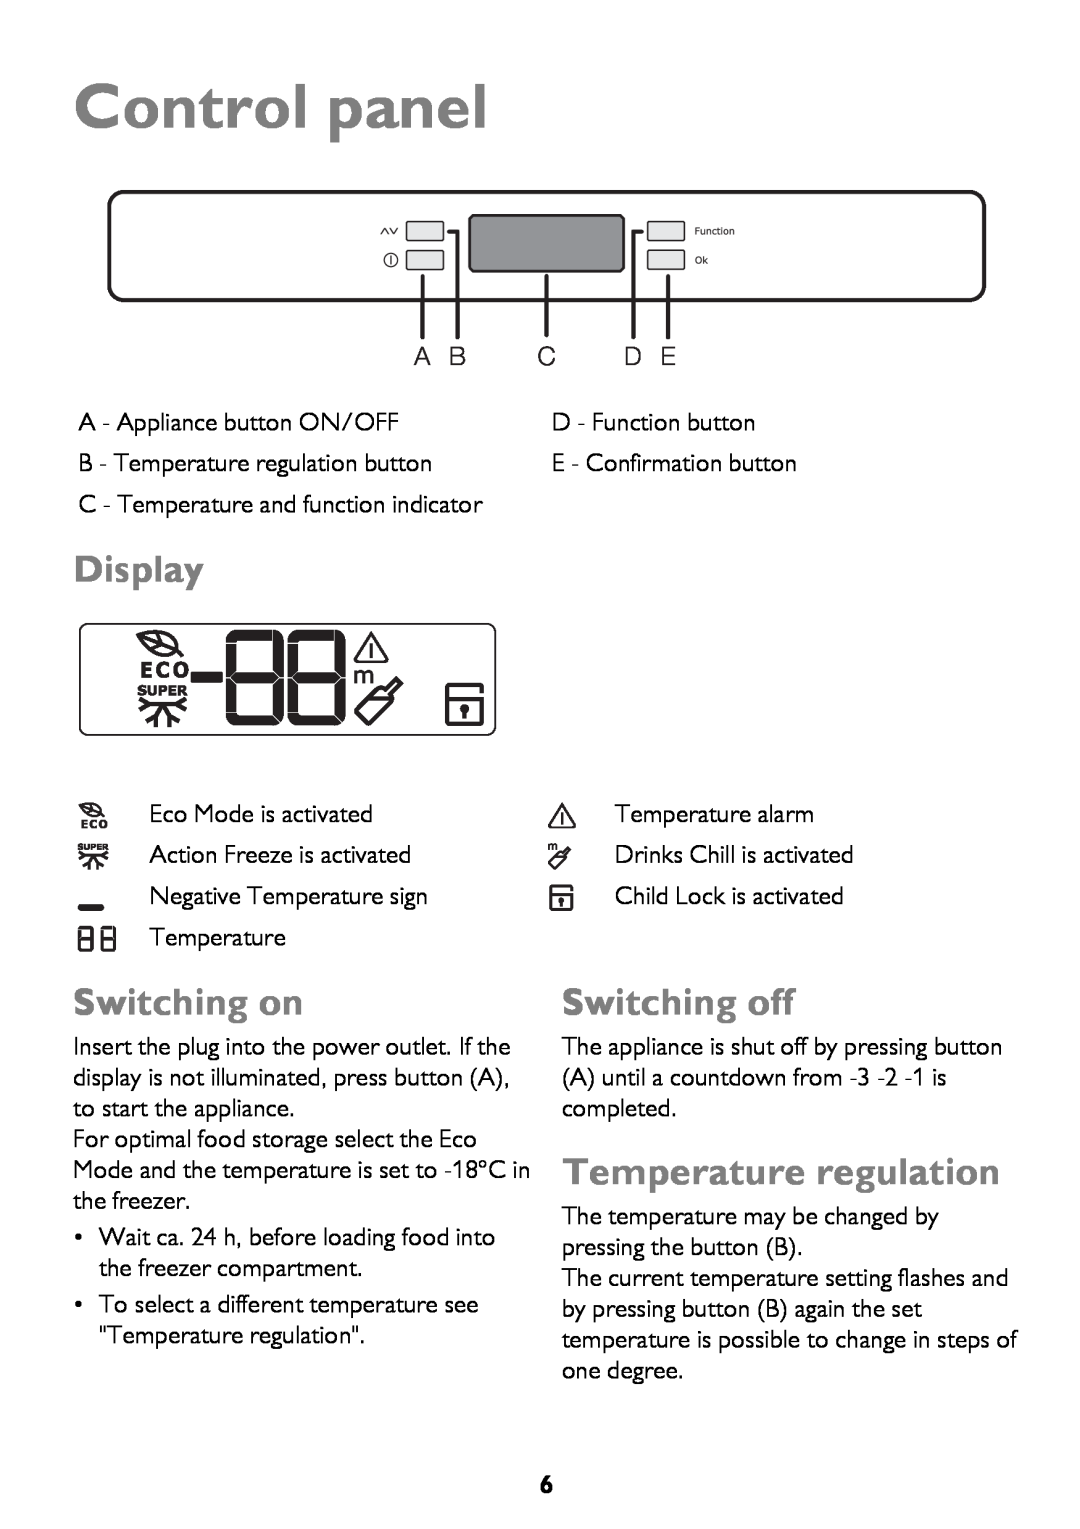 John Lewis JLFZW1601 instruction manual Control panel, Display, Switching on, Switching off, Temperature regulation 